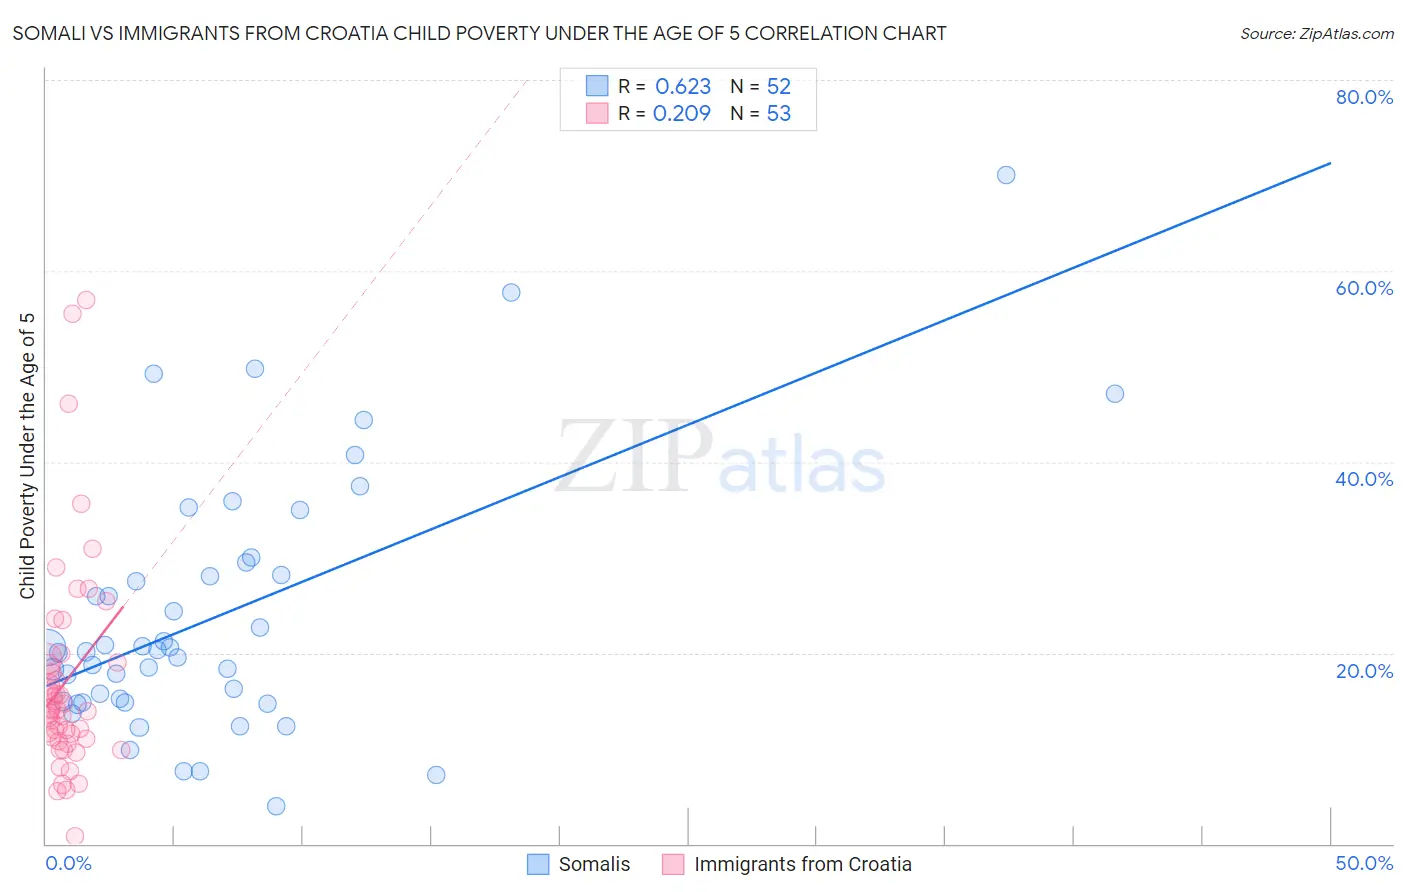 Somali vs Immigrants from Croatia Child Poverty Under the Age of 5